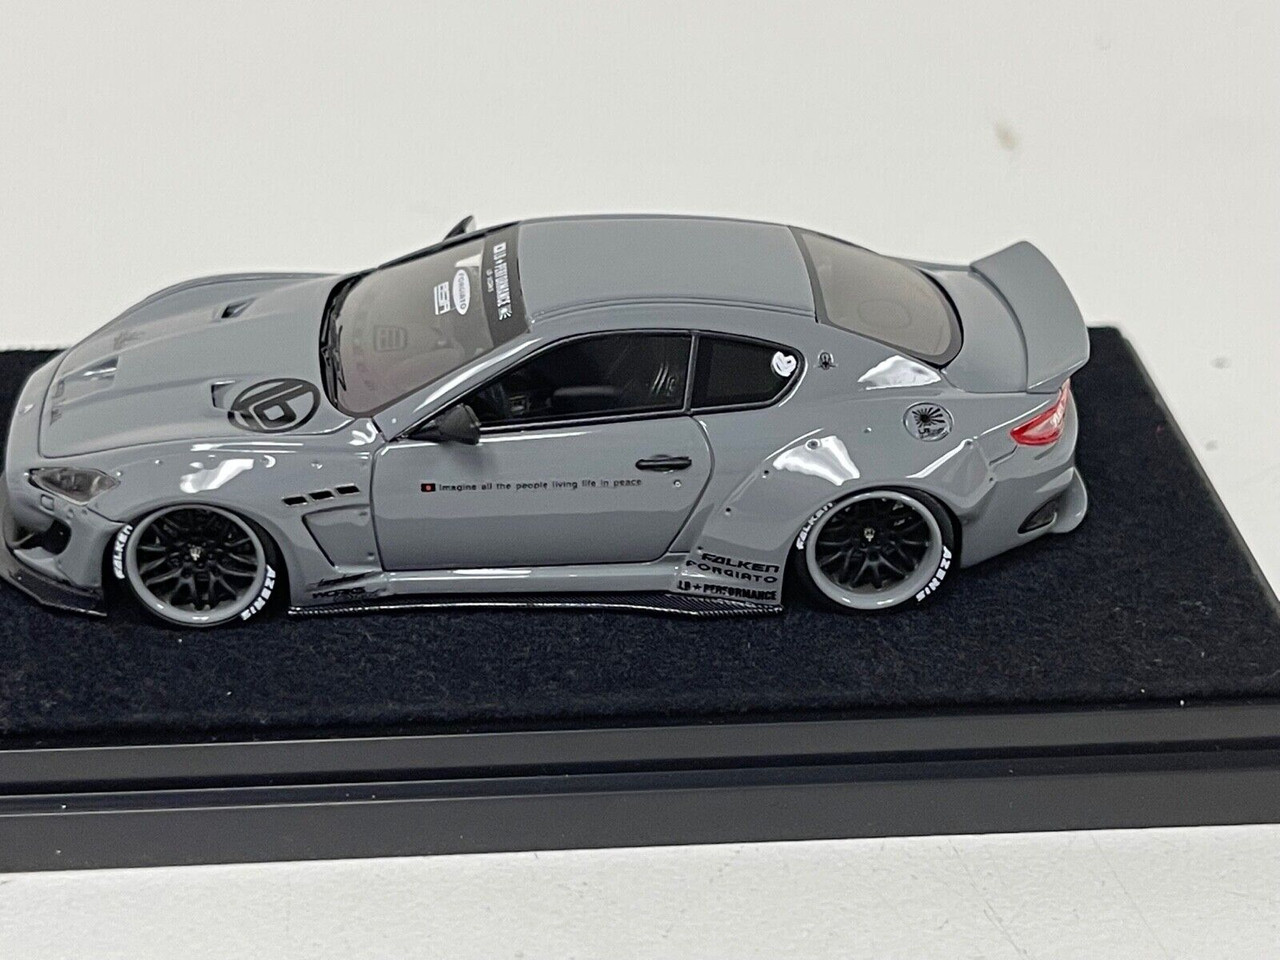 YM In Stock 1:64 LBWK GranTurismoS GTS Fight Grey Resin Diorama Car Model  Collection Miniature Carros Toys